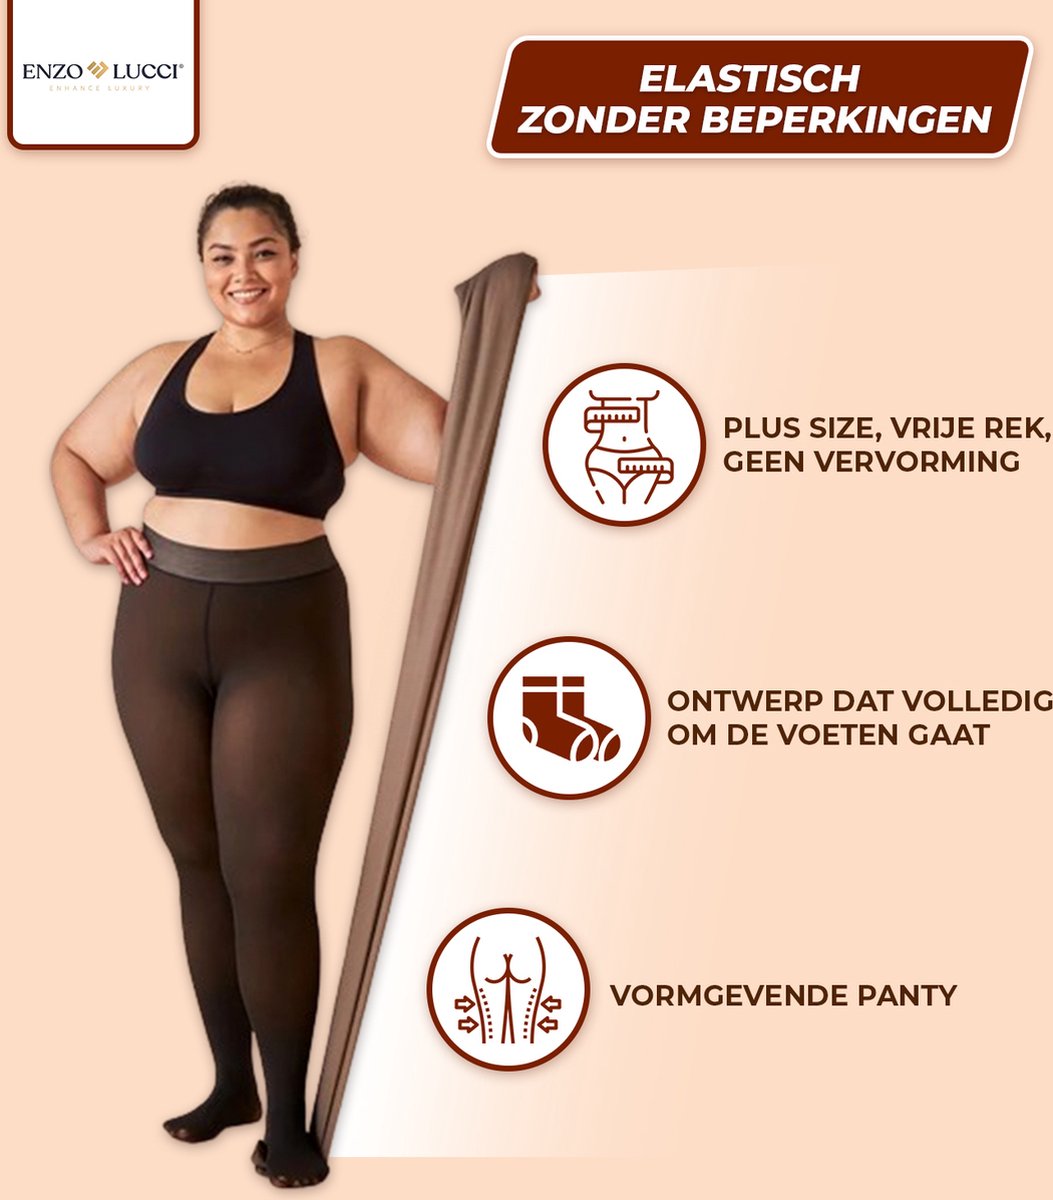 Enzo Lucci Fleece Panty voor Dames - Thermo Legging Panty’s - Plus Size Maillot - Gevoerde panty - Maat M/L